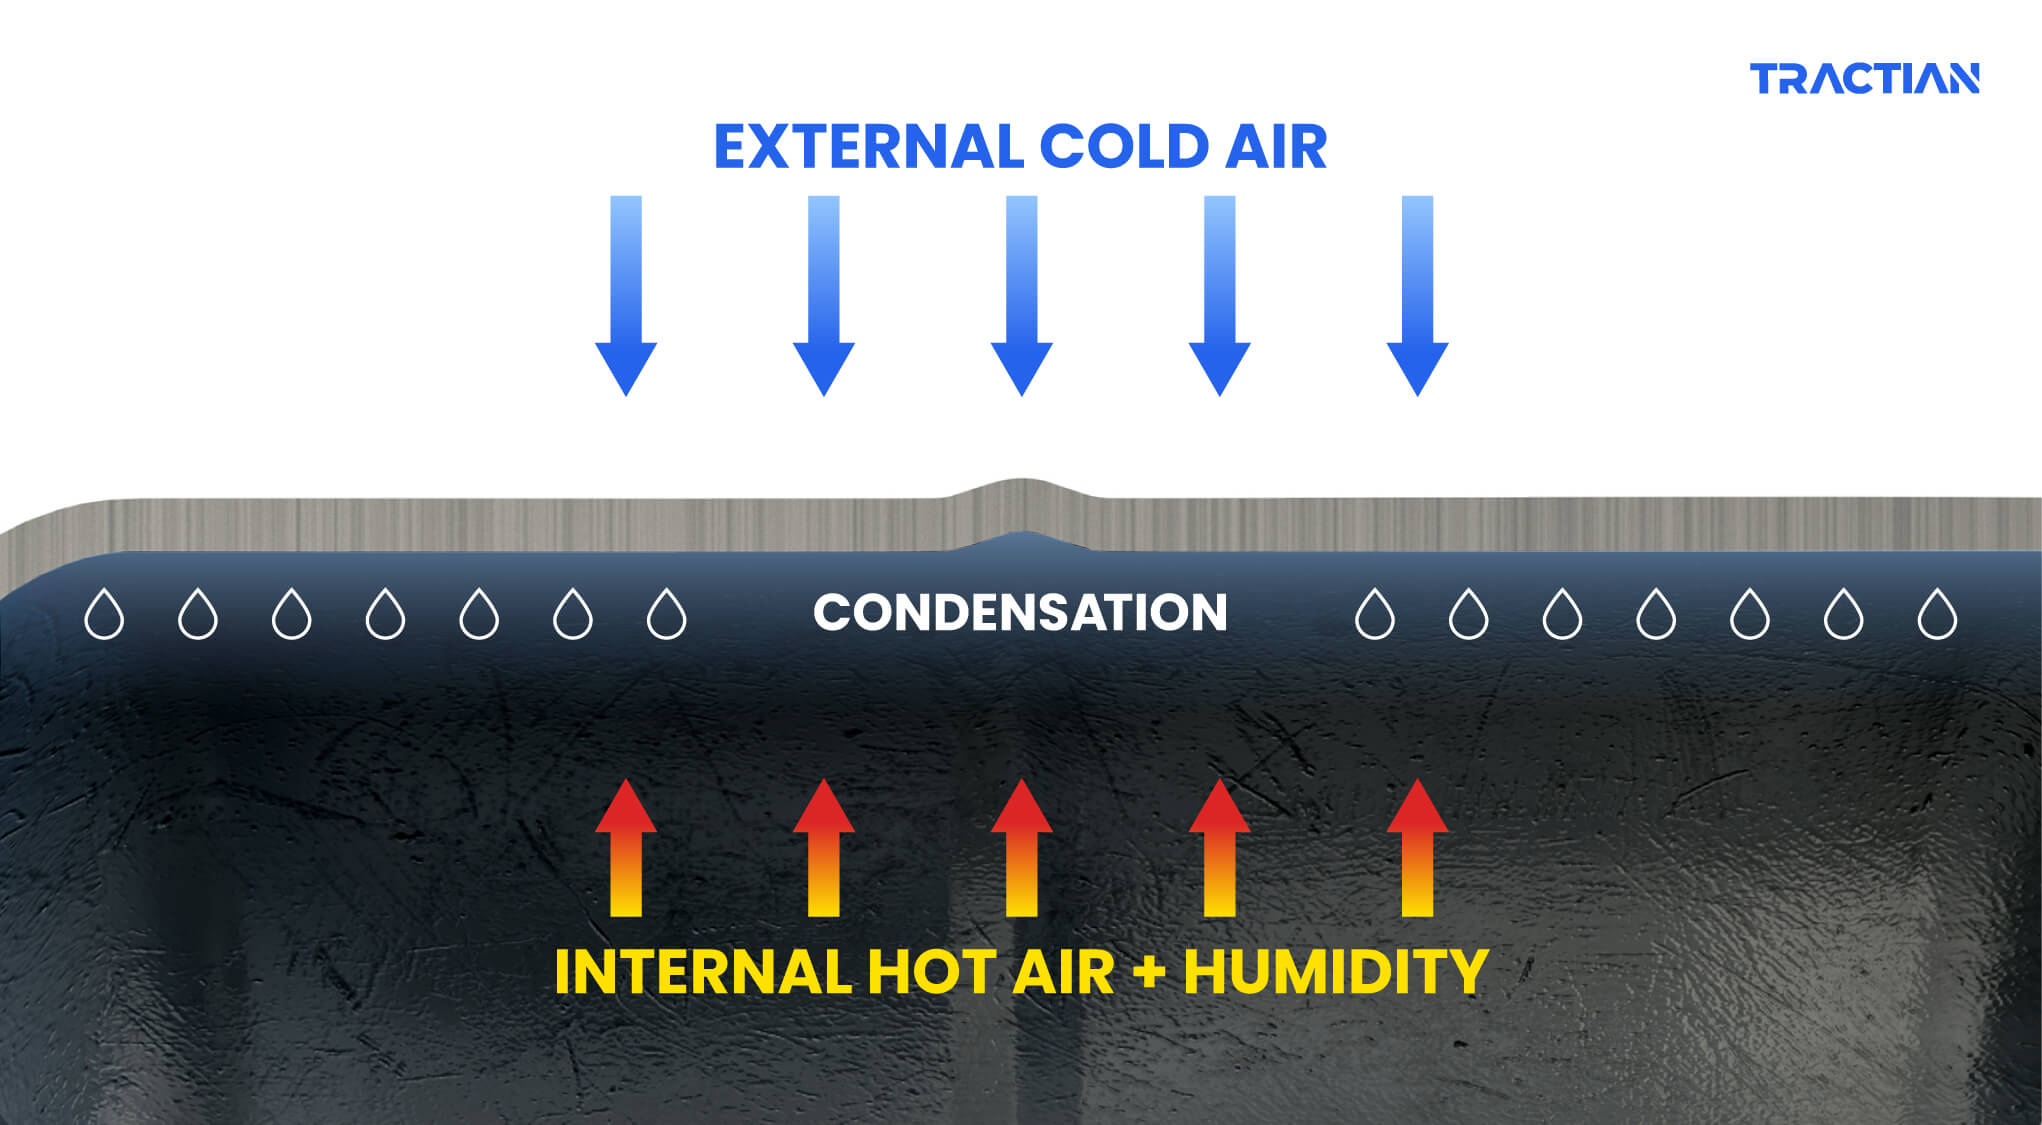 An example showing how condensation is created - with external cold air and internal hot air and humidity